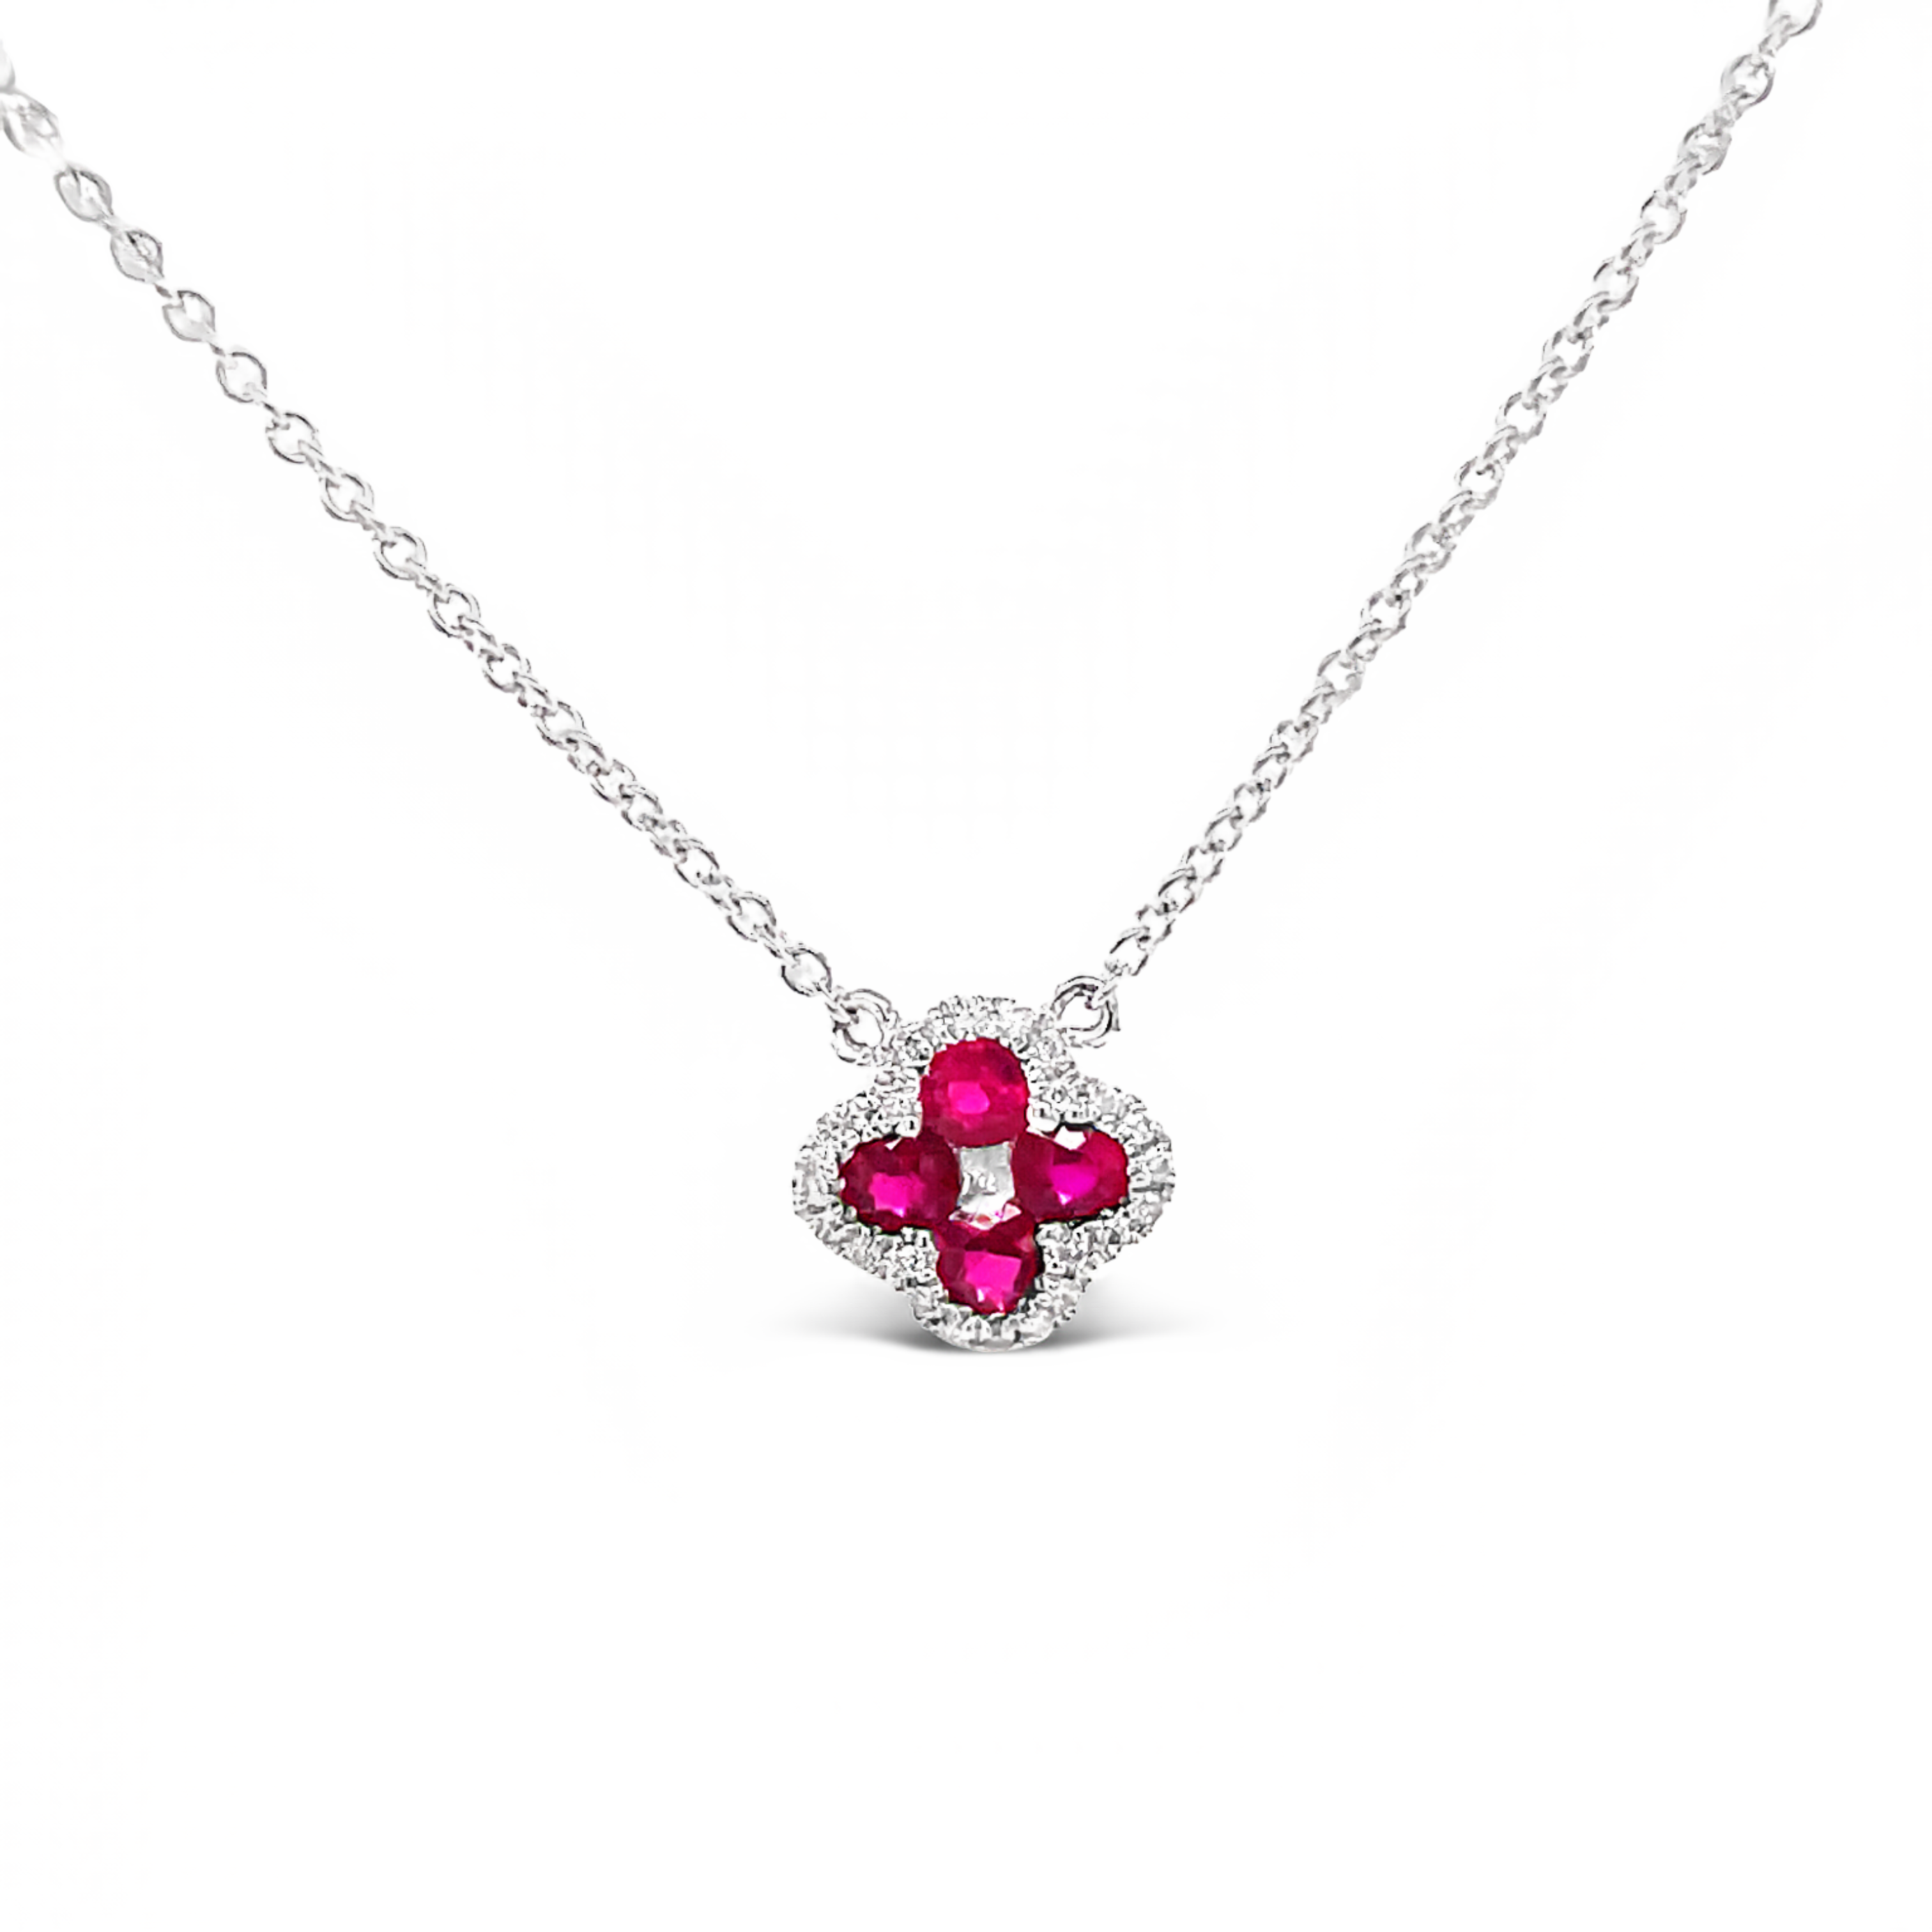 Diamond clover necklace 0.10 cts  Round rubies 0.25 cts   Color F/G  Clarity VS1  Set in 18 white gold   17" long with sizable loop at 16"  8.00 mm 